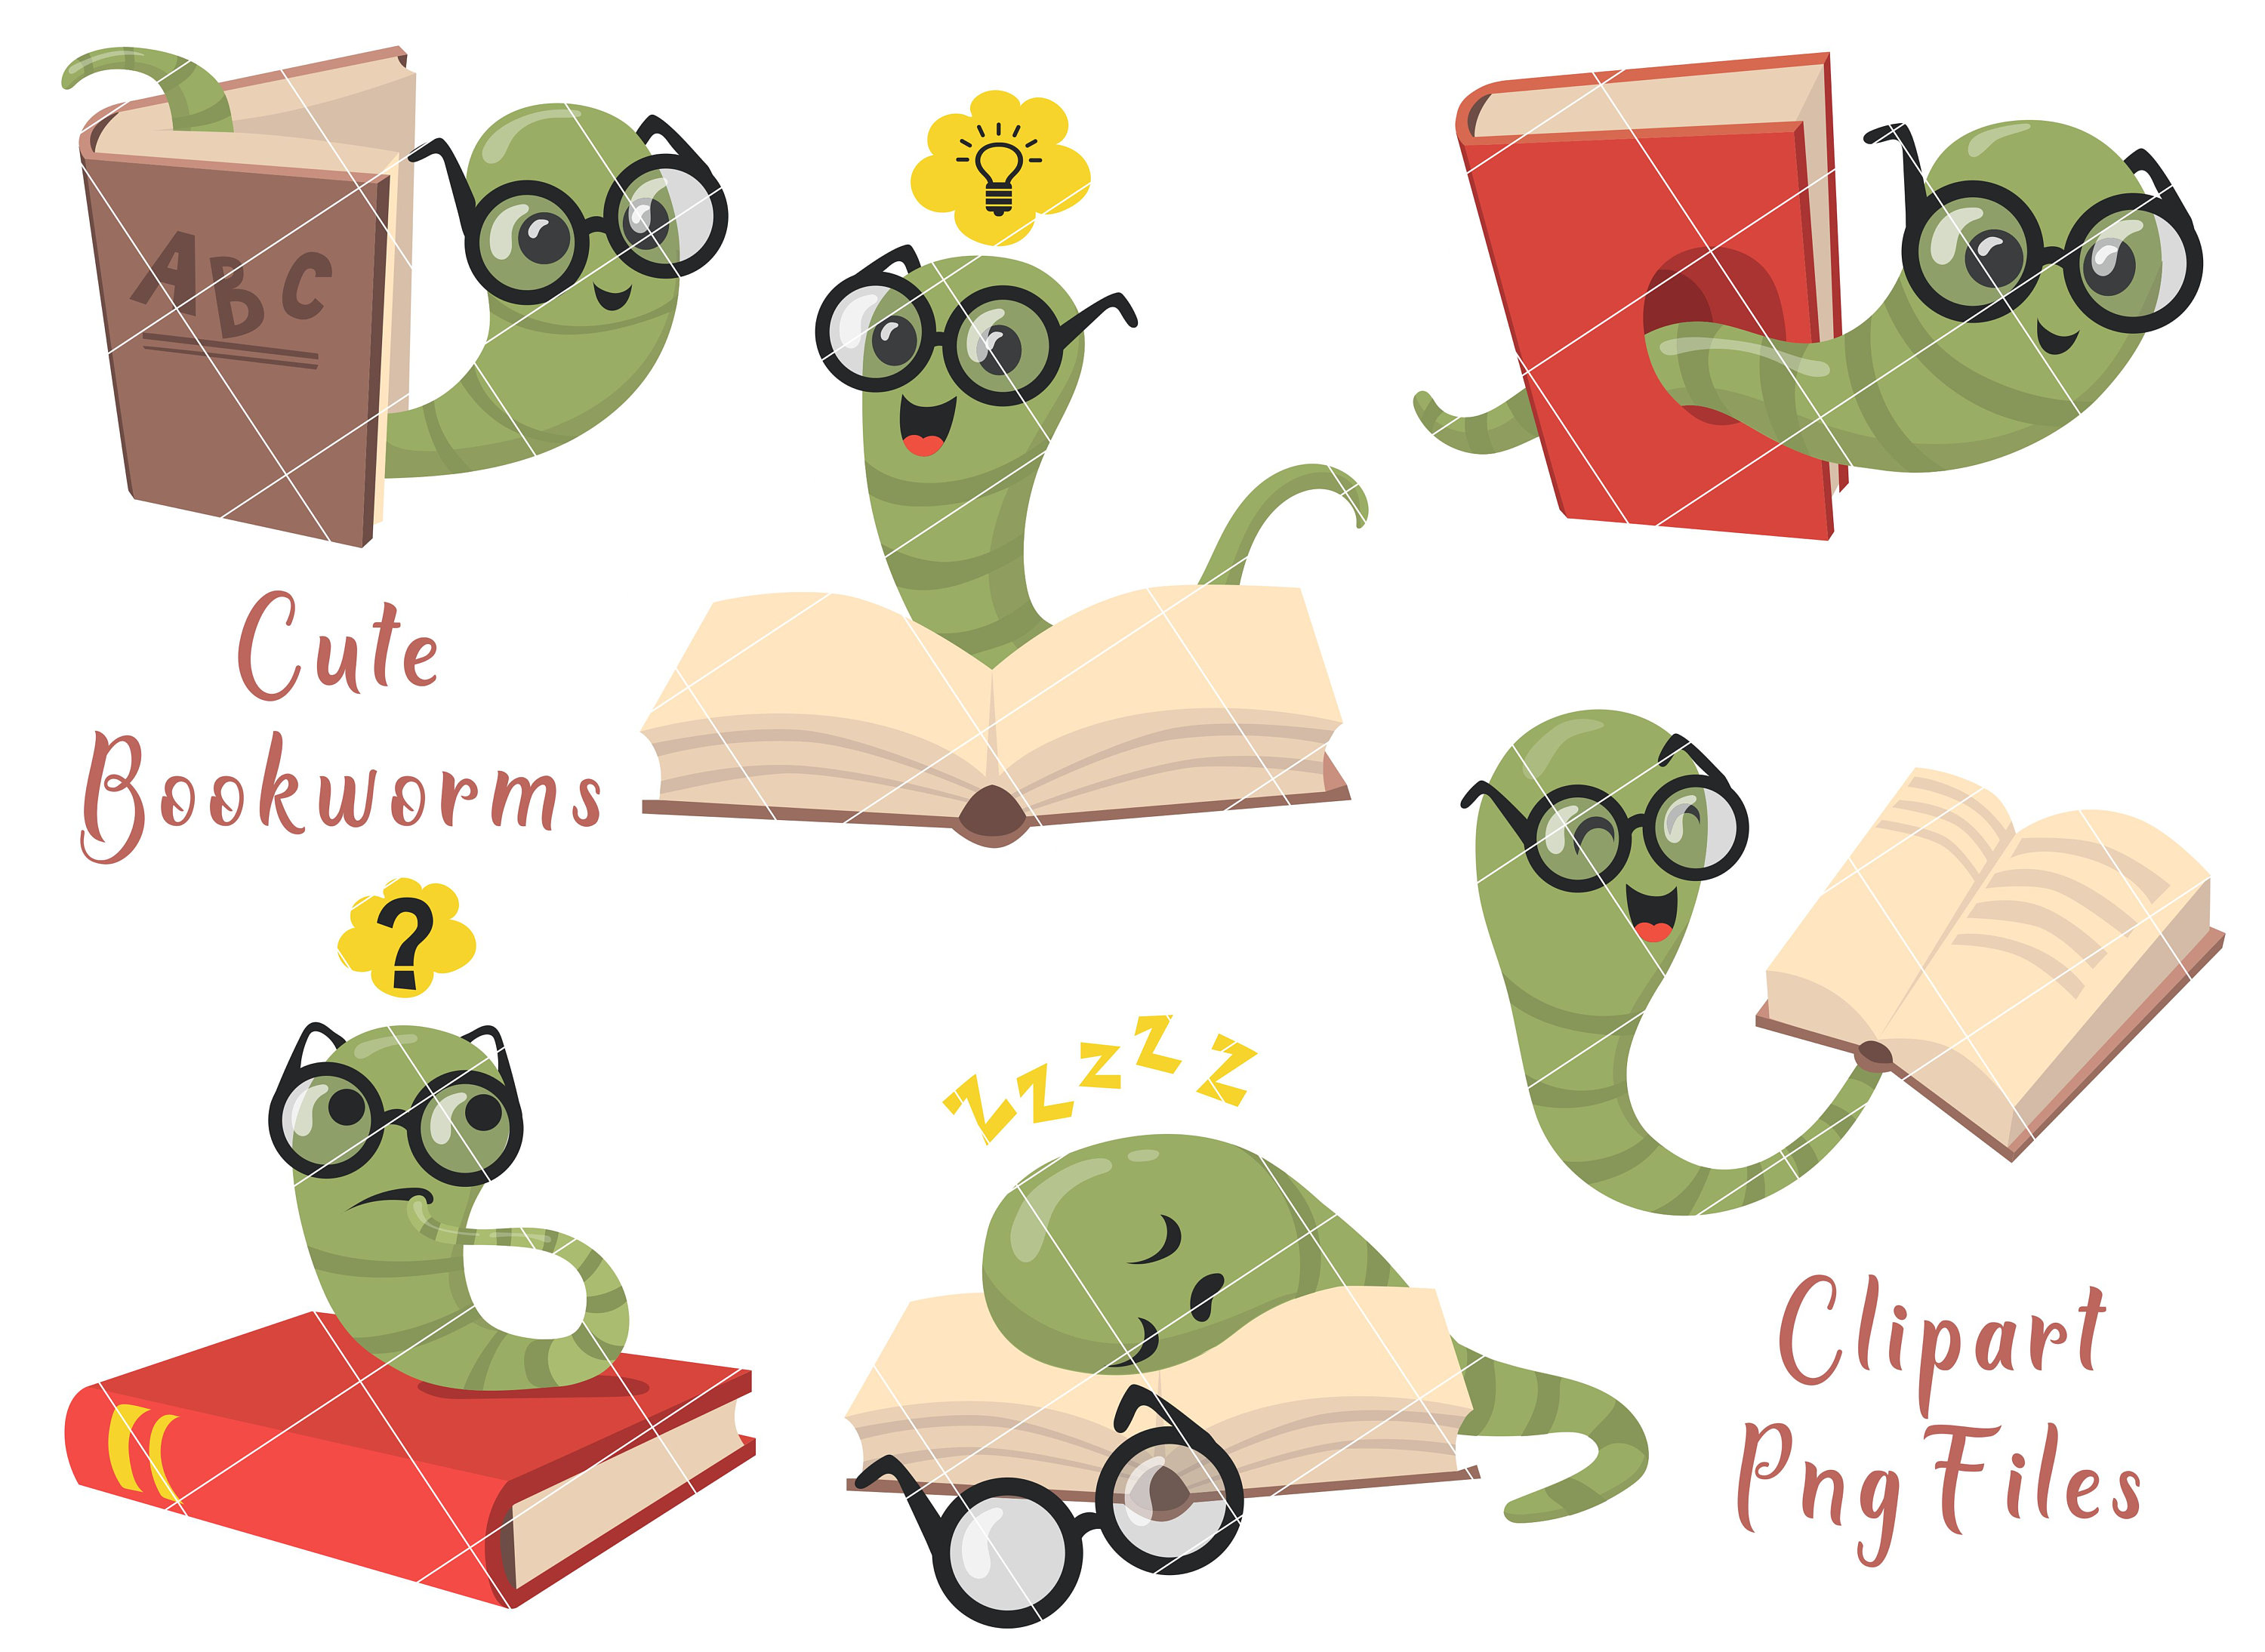 wiggly worm clipart